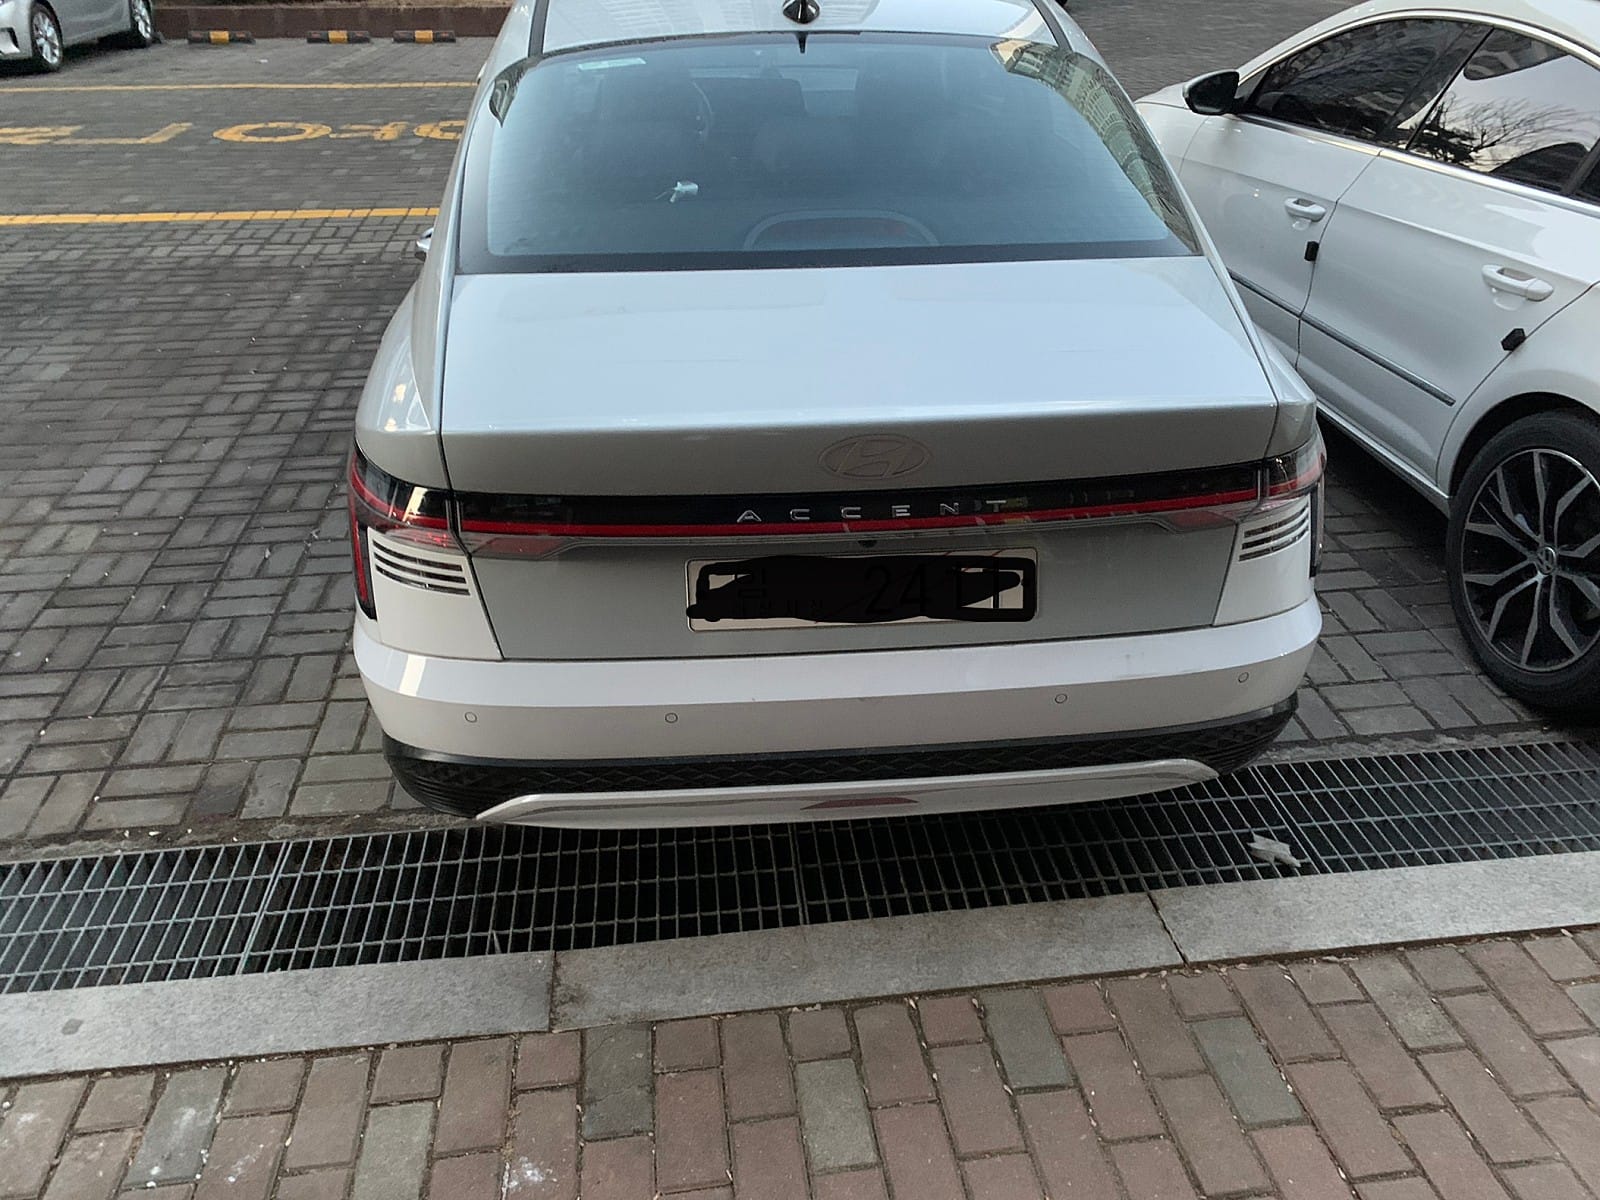 Leaked rear image of the new Hyundai Verna posted by a blogger on February 26 (Image Source: Namcha Cafe/ Naver)